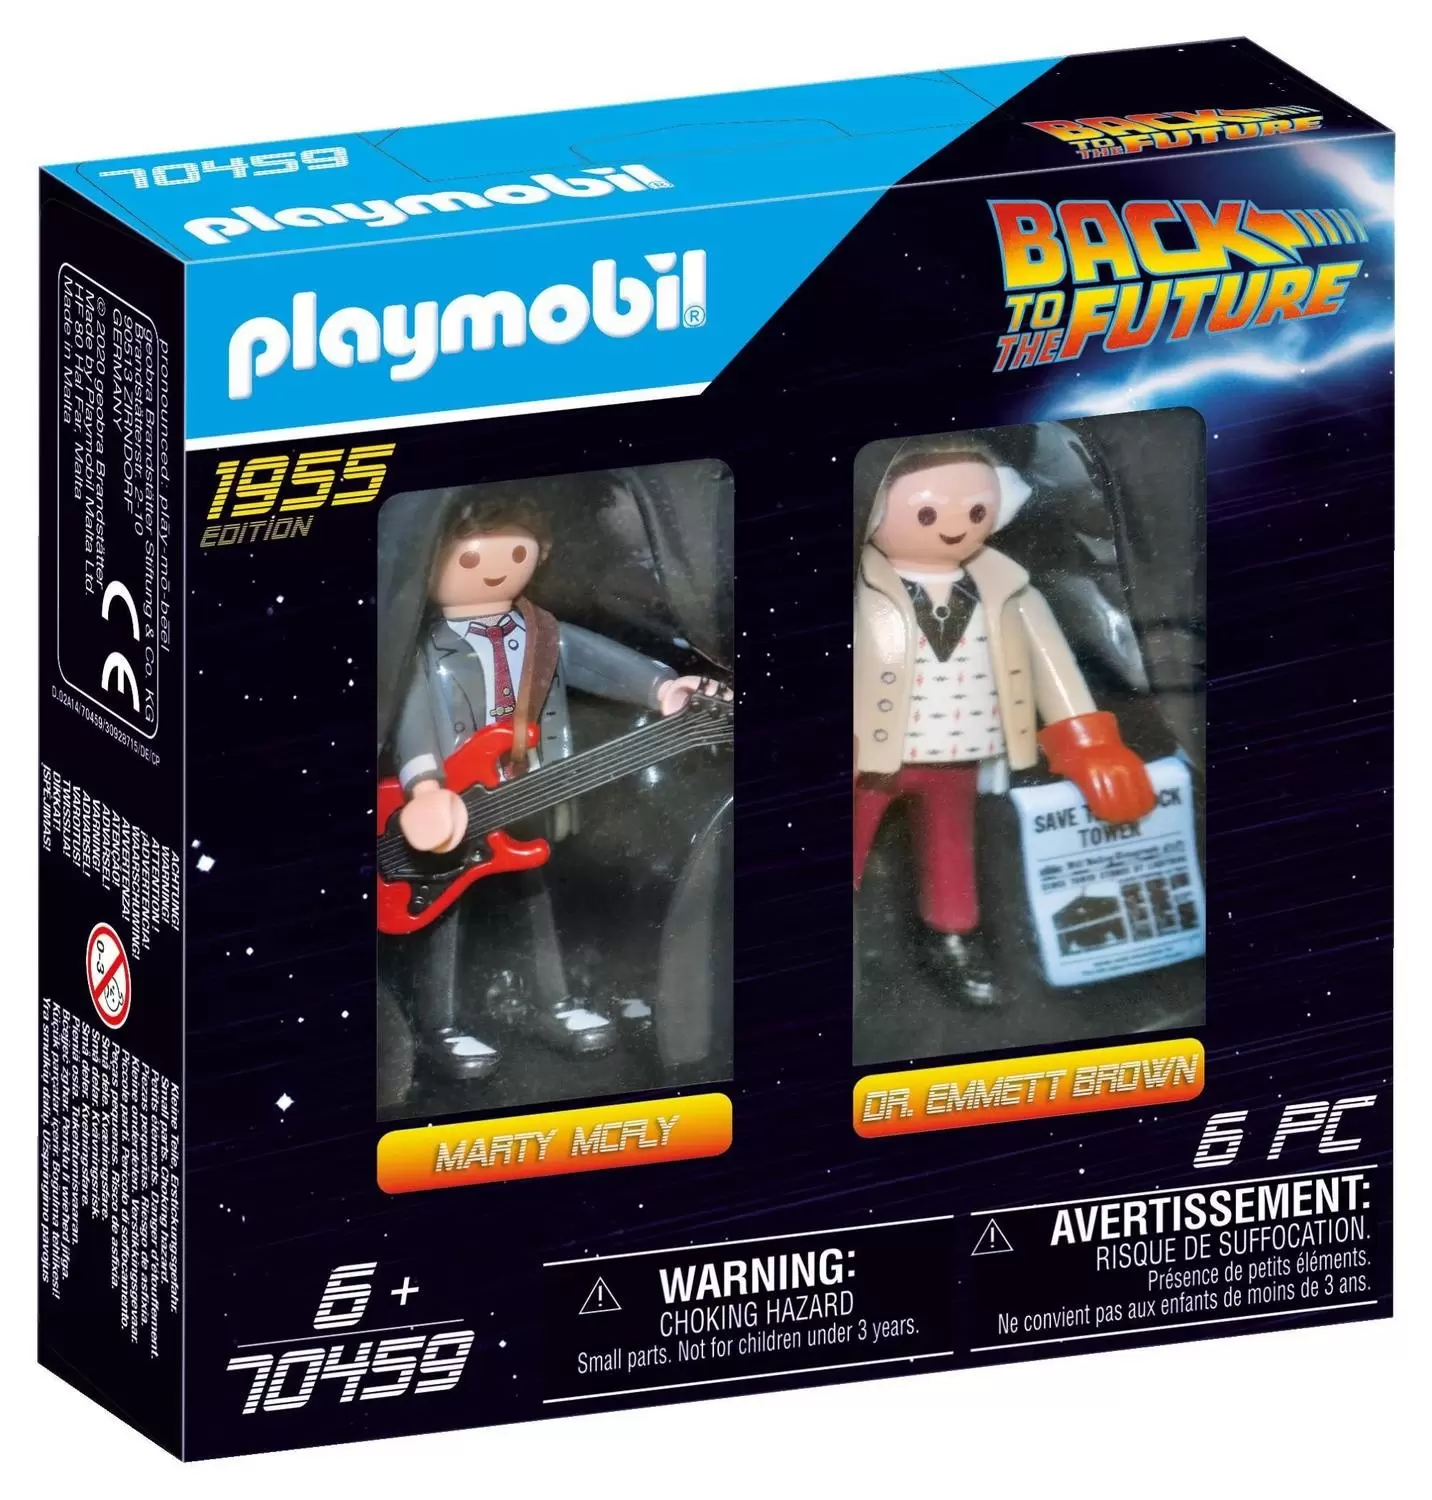 Playmobil Retour vers le Futur - Back to the Future - Marty McFly & Dr. Emmett Brown - 1955 Edition